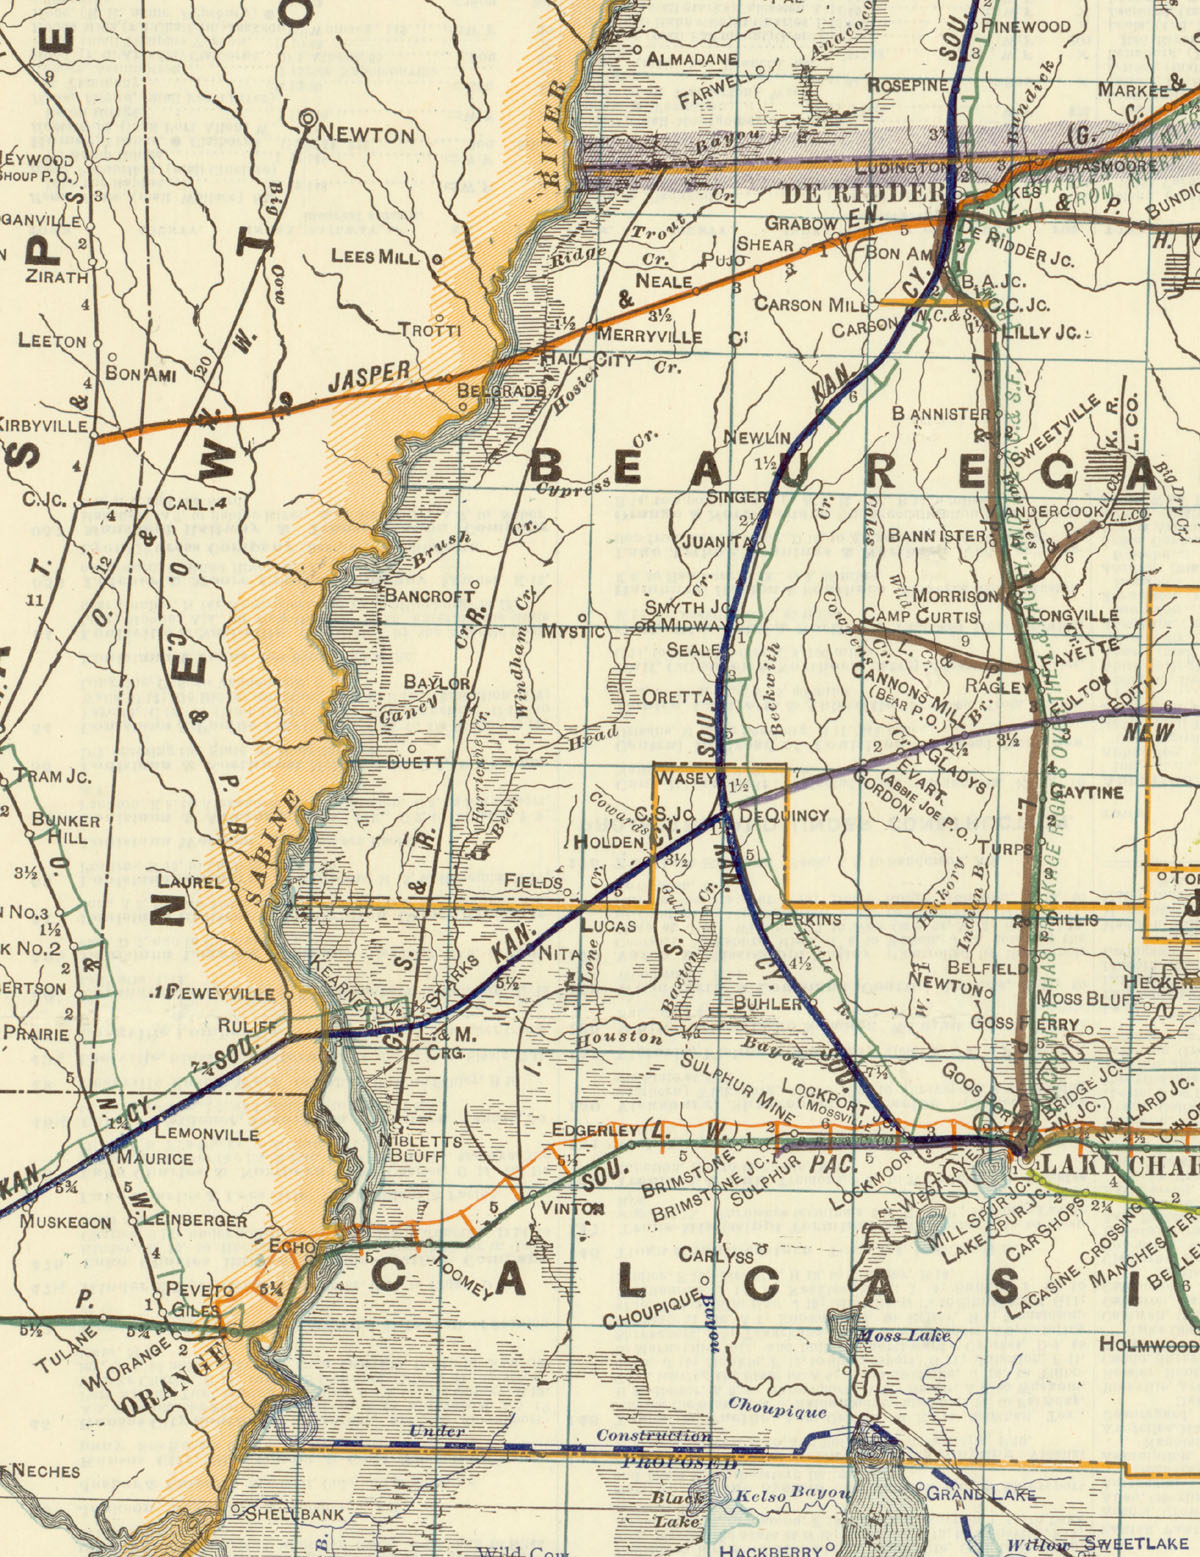 Gulf, Sabine & Red River Railroad, Map Showing Route in 1922.